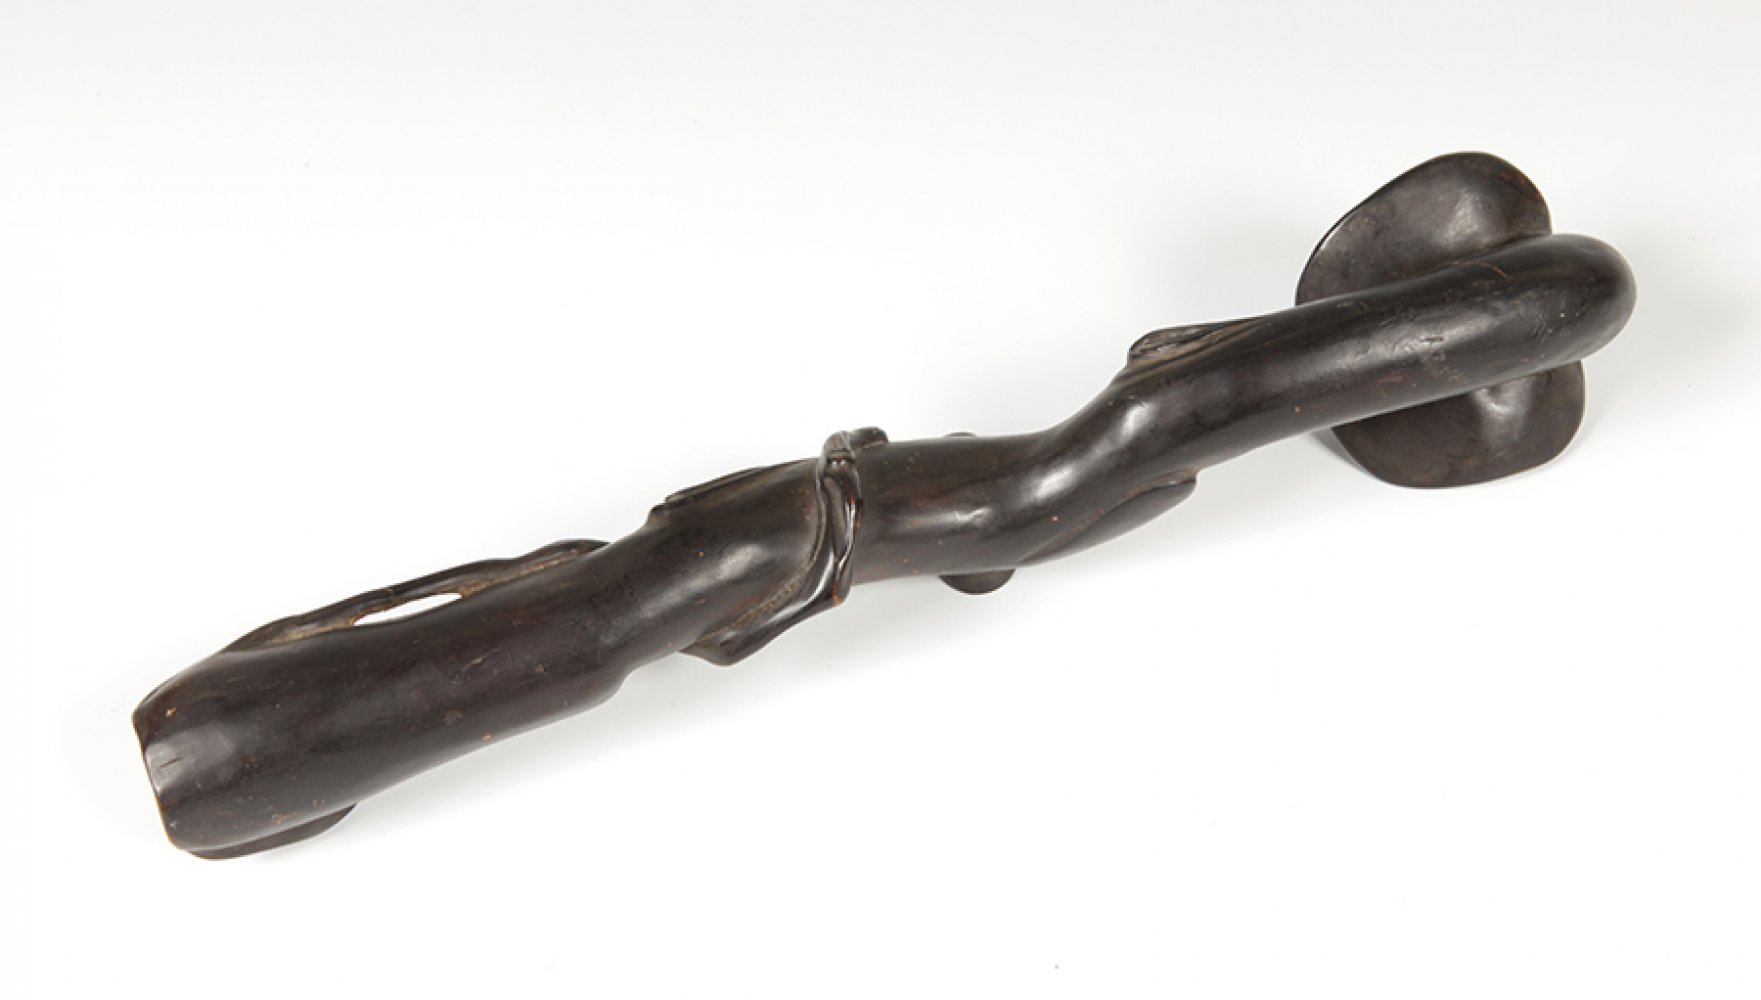 Ruyi sceptre; Liaoning, China, 19th century.Carved wood.Measurements: 37 cm long.This type of - Image 3 of 3